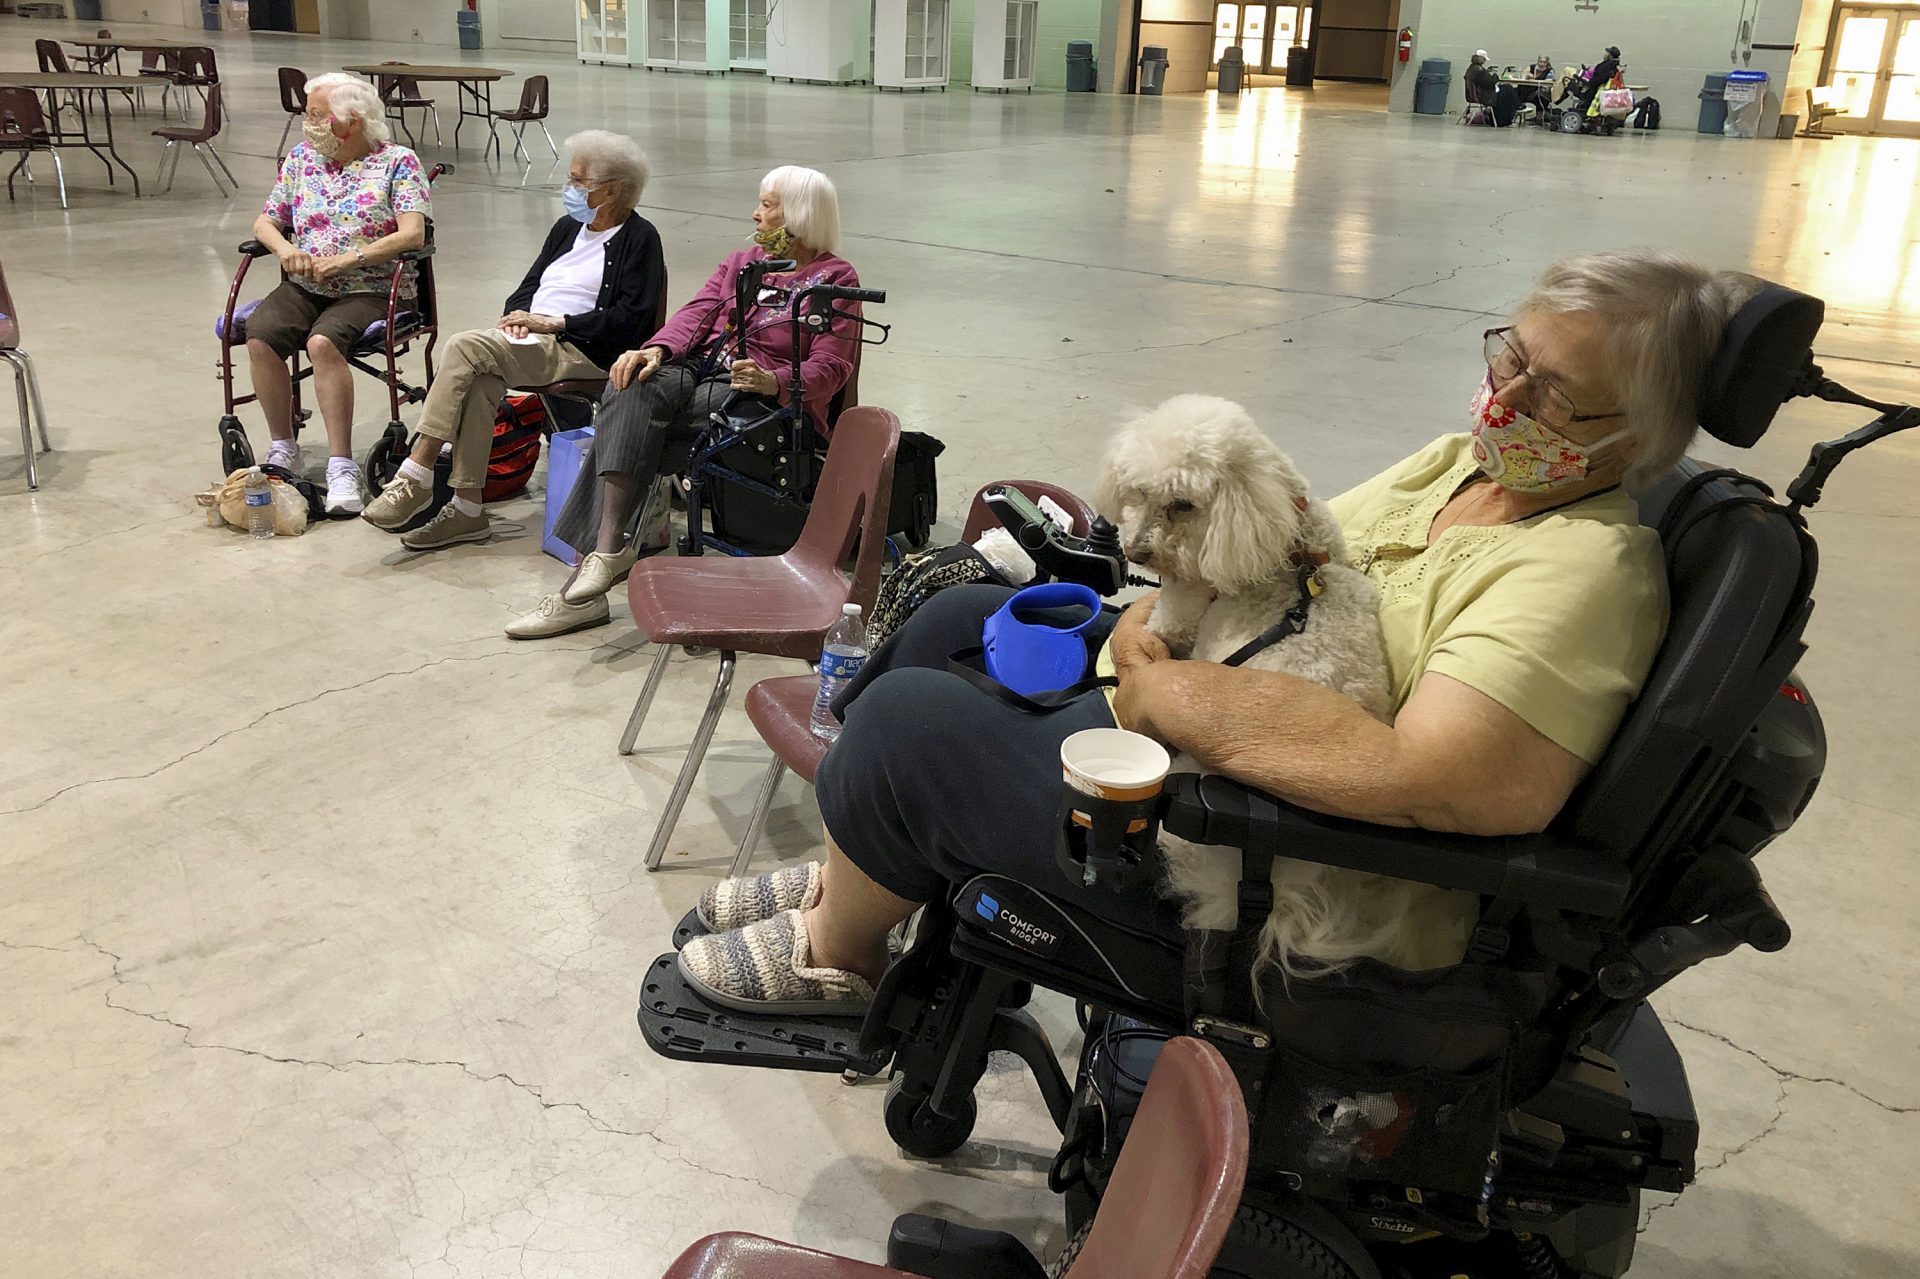 Patricia Fouts sits with her dog, Murphy, and other evacuated residents of a senior living home in an evacuation center at the Oregon State Fairgrounds in Salem, Ore., on Tuesday. Marian Estates senior living home in Sublimity, Ore., was evacuated early Tuesday as a wildfire closed in on the area.